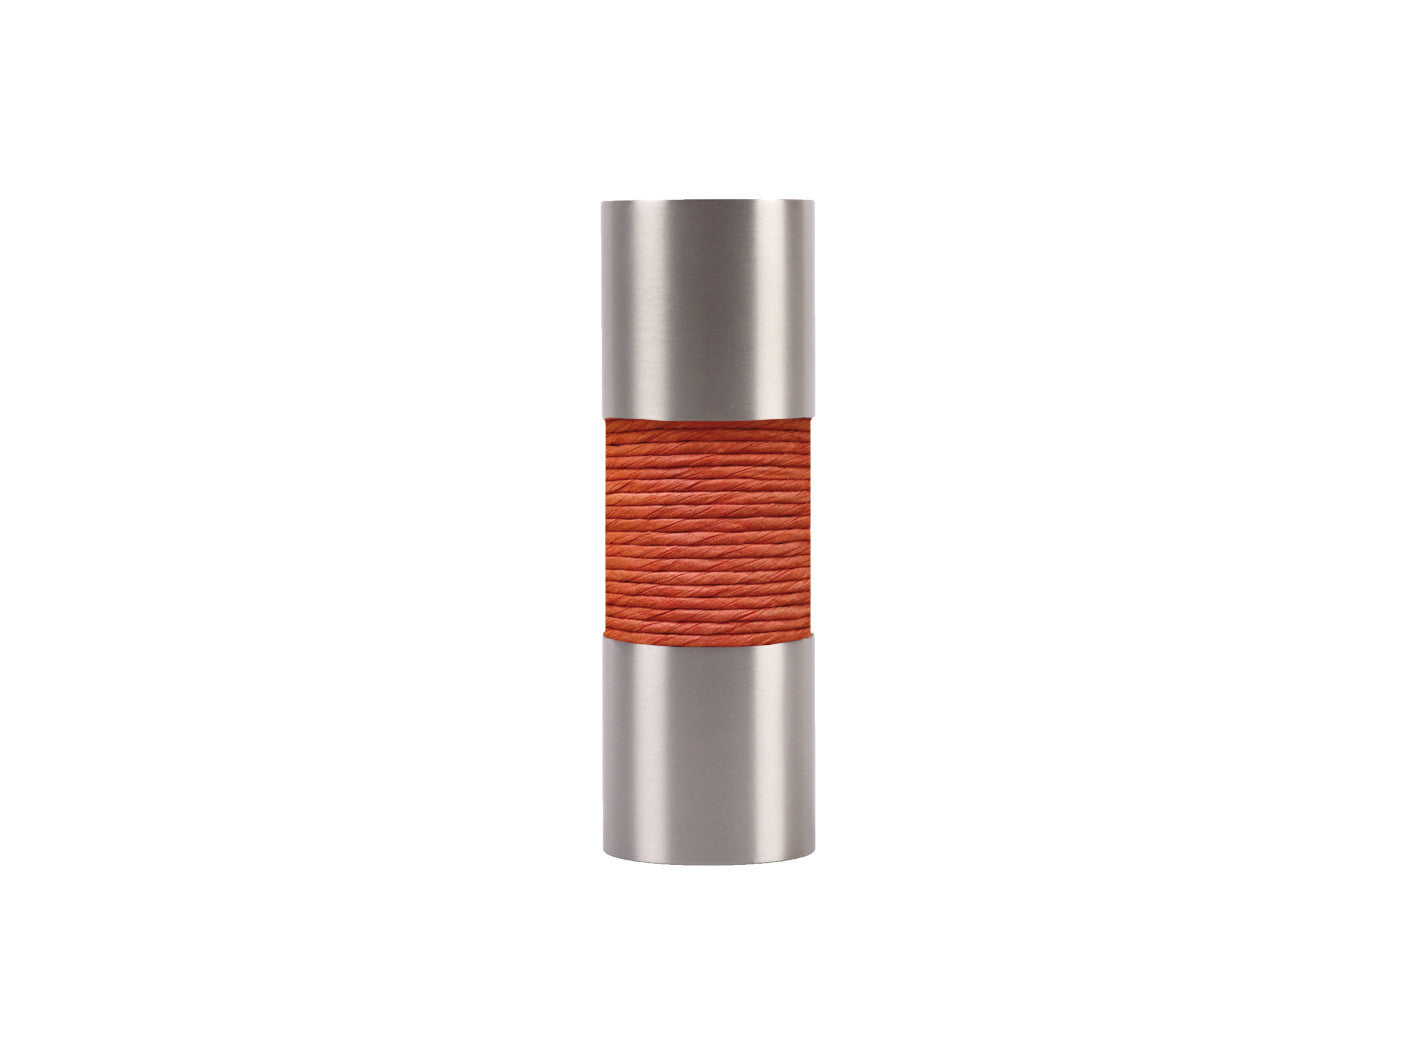 Coral orange curtain pole finial, stainless steel barrel, for 19mm diameter pole